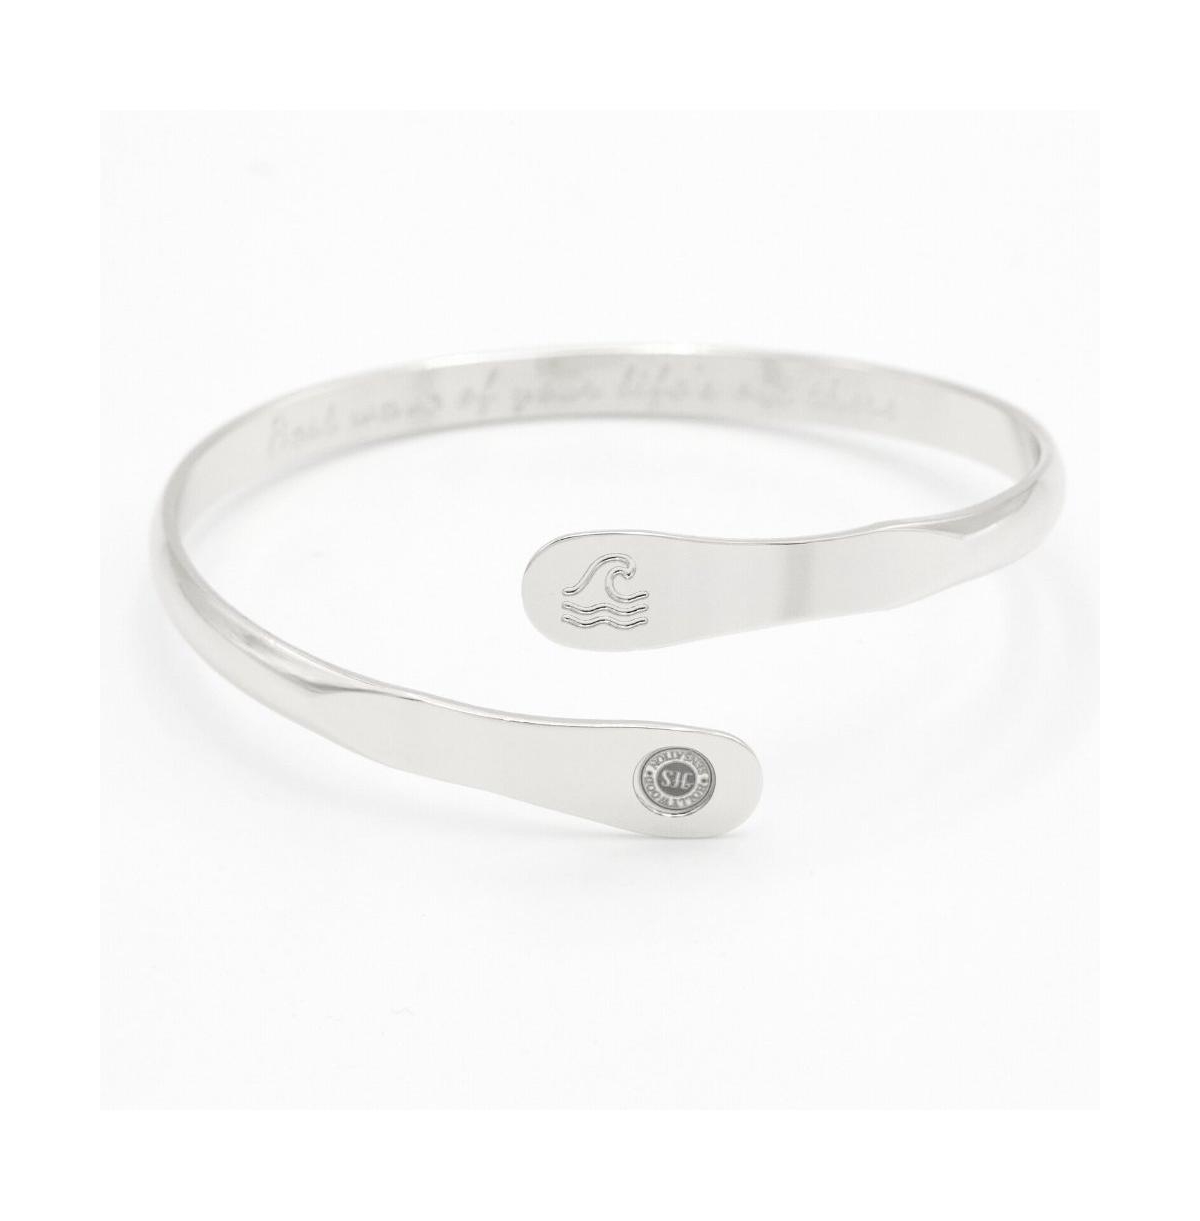 Wave Bracelets, Engraved Best wave of your life's out there - Silver